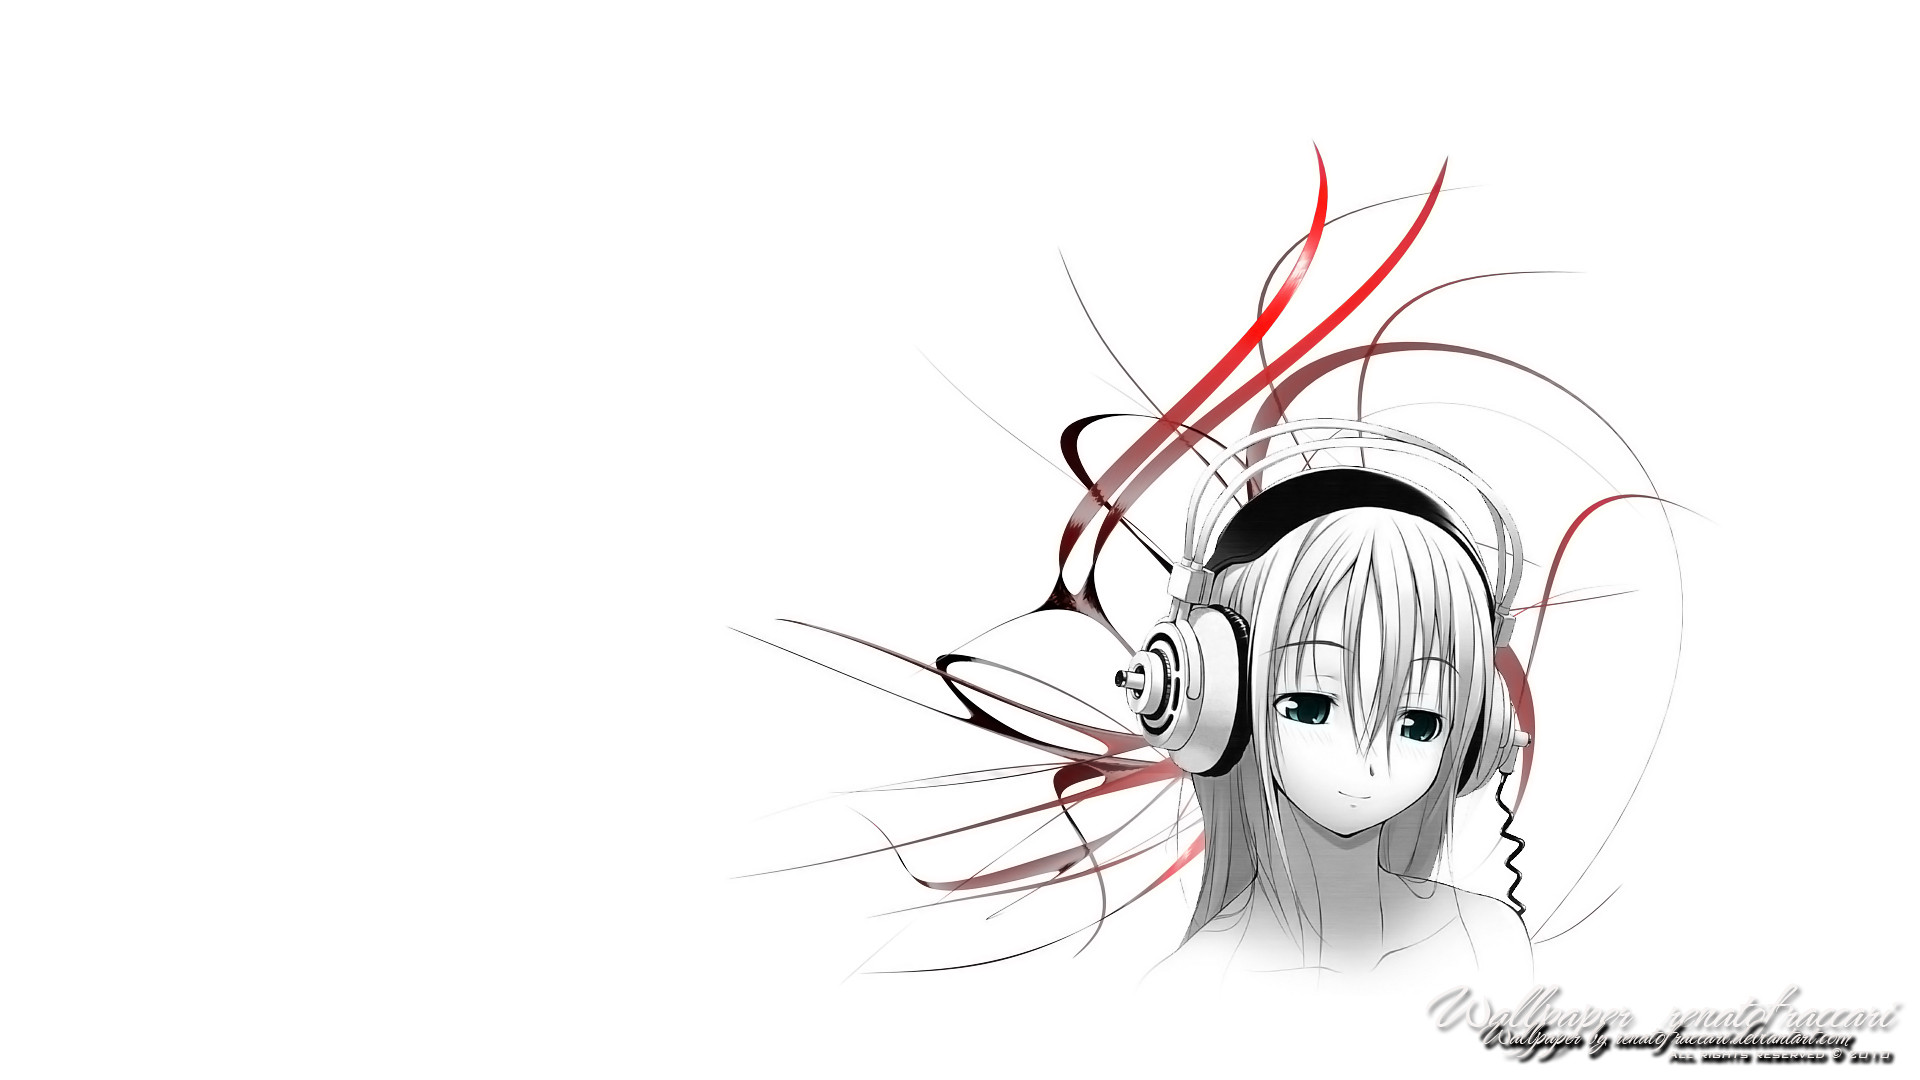 Anime Wallpapers Hd Download - Anime With Head Phones Hd - 1920x1080  Wallpaper 